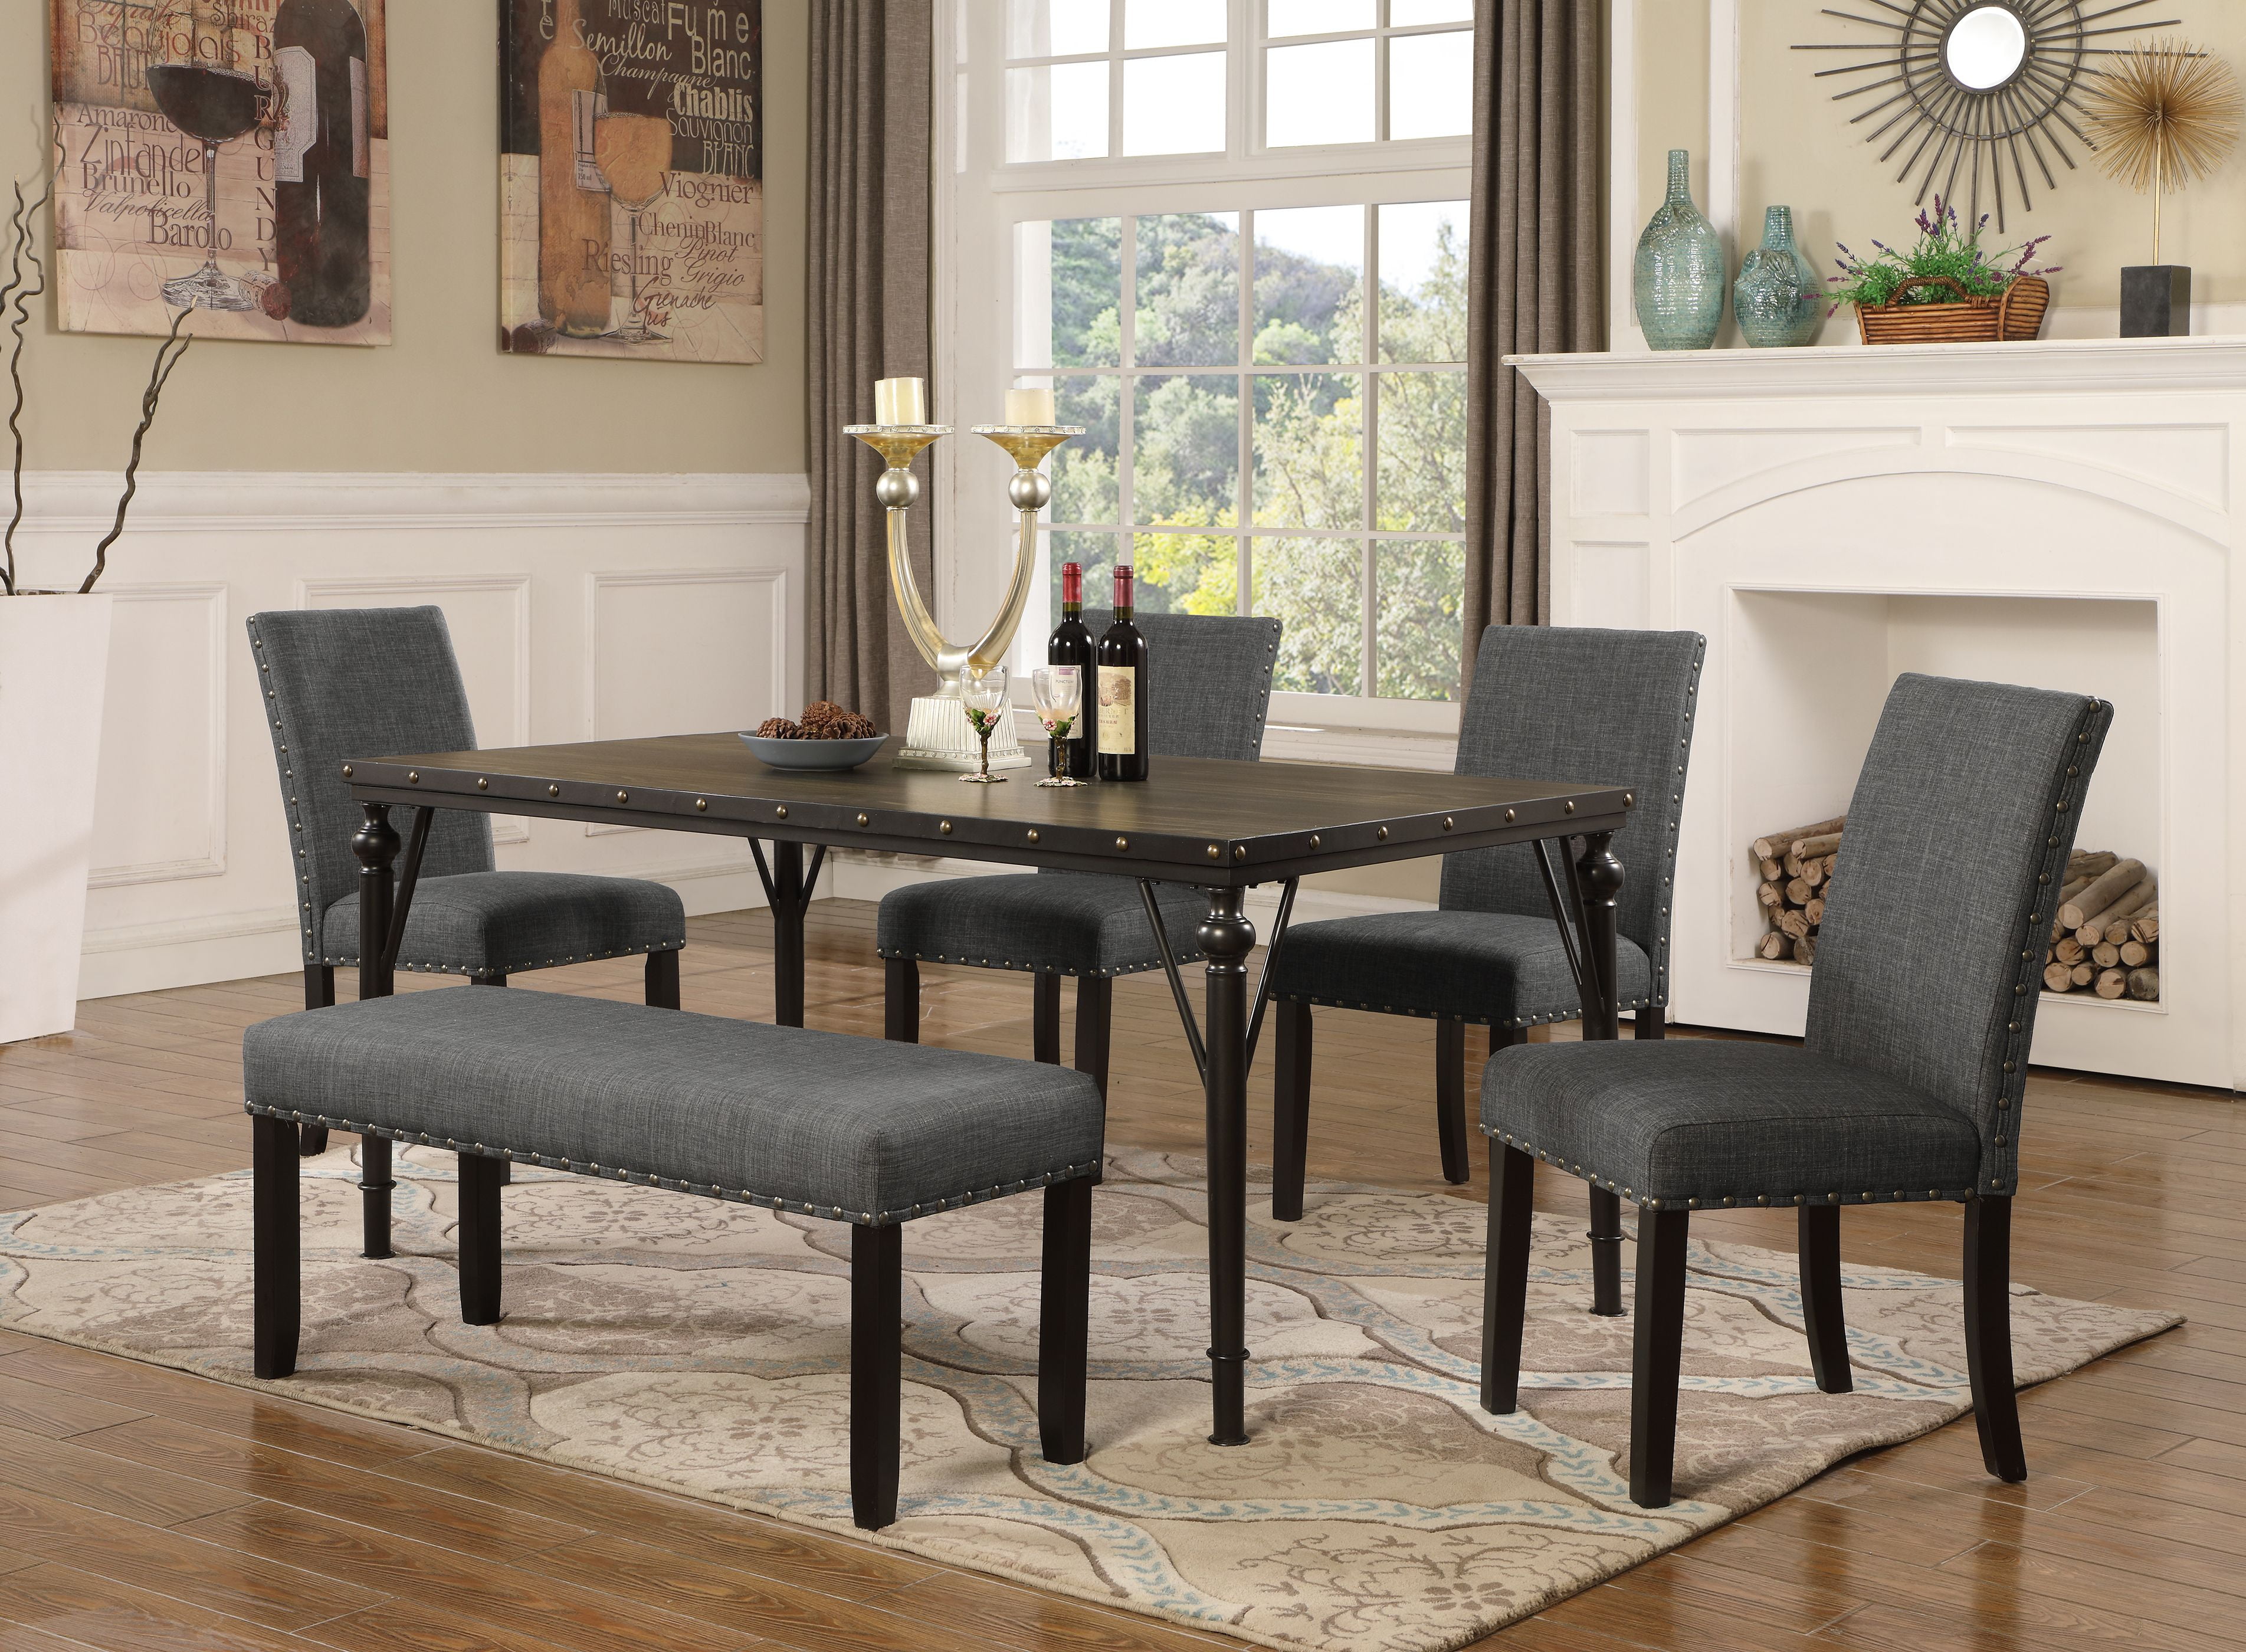 Dining Room Set With Nailhead Chairs